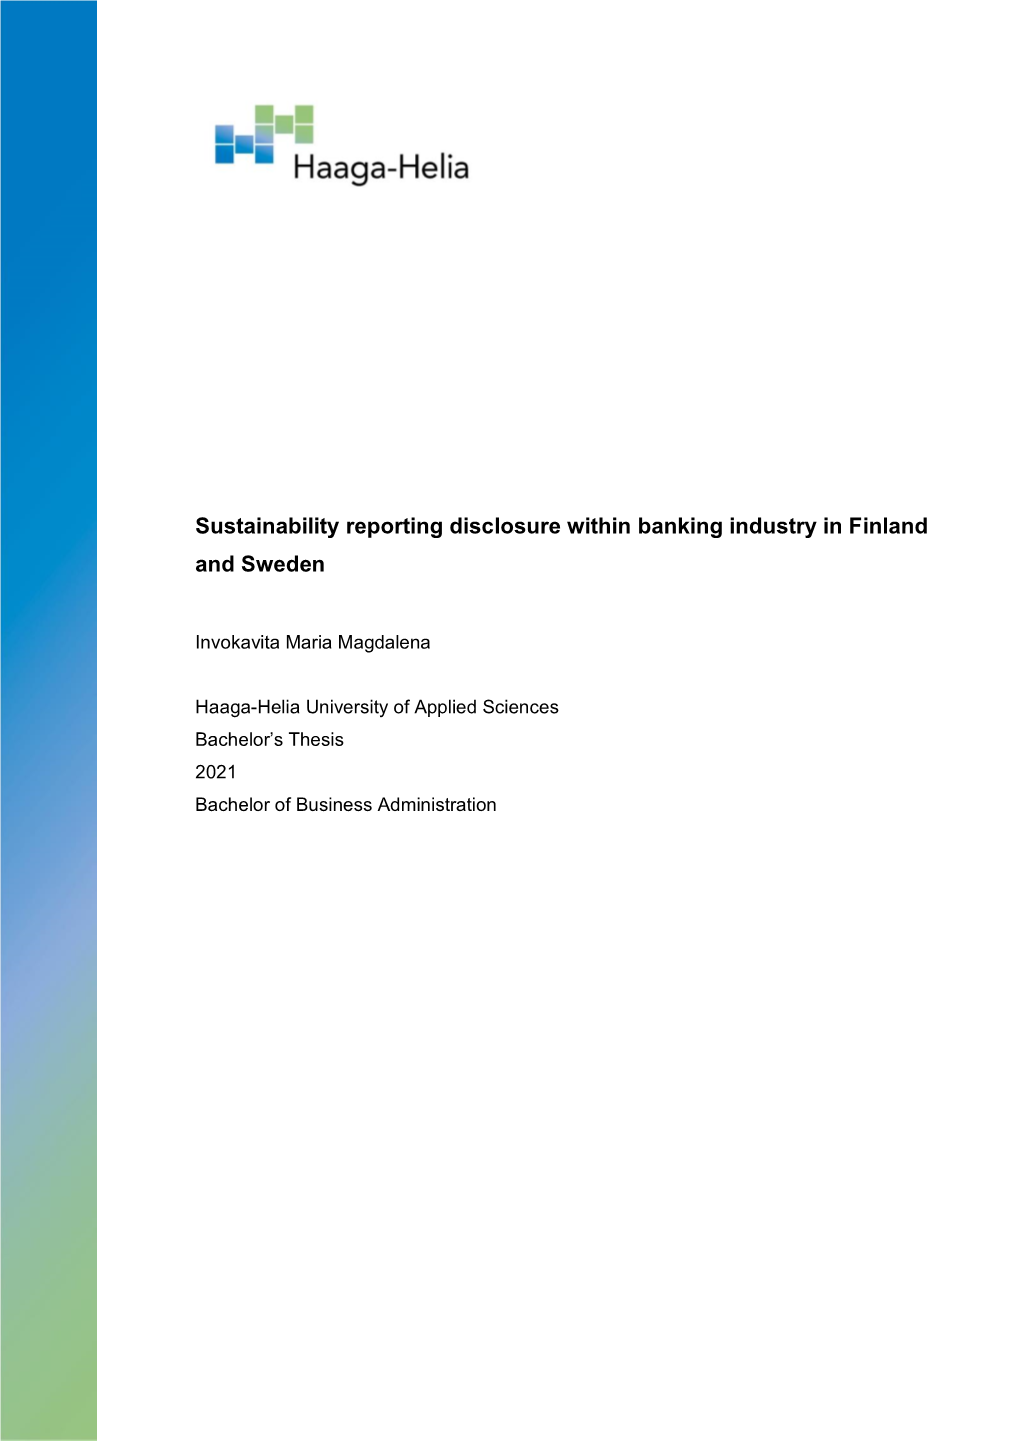 Sustainability Reporting Disclosure Within Banking Industry in Finland and Sweden